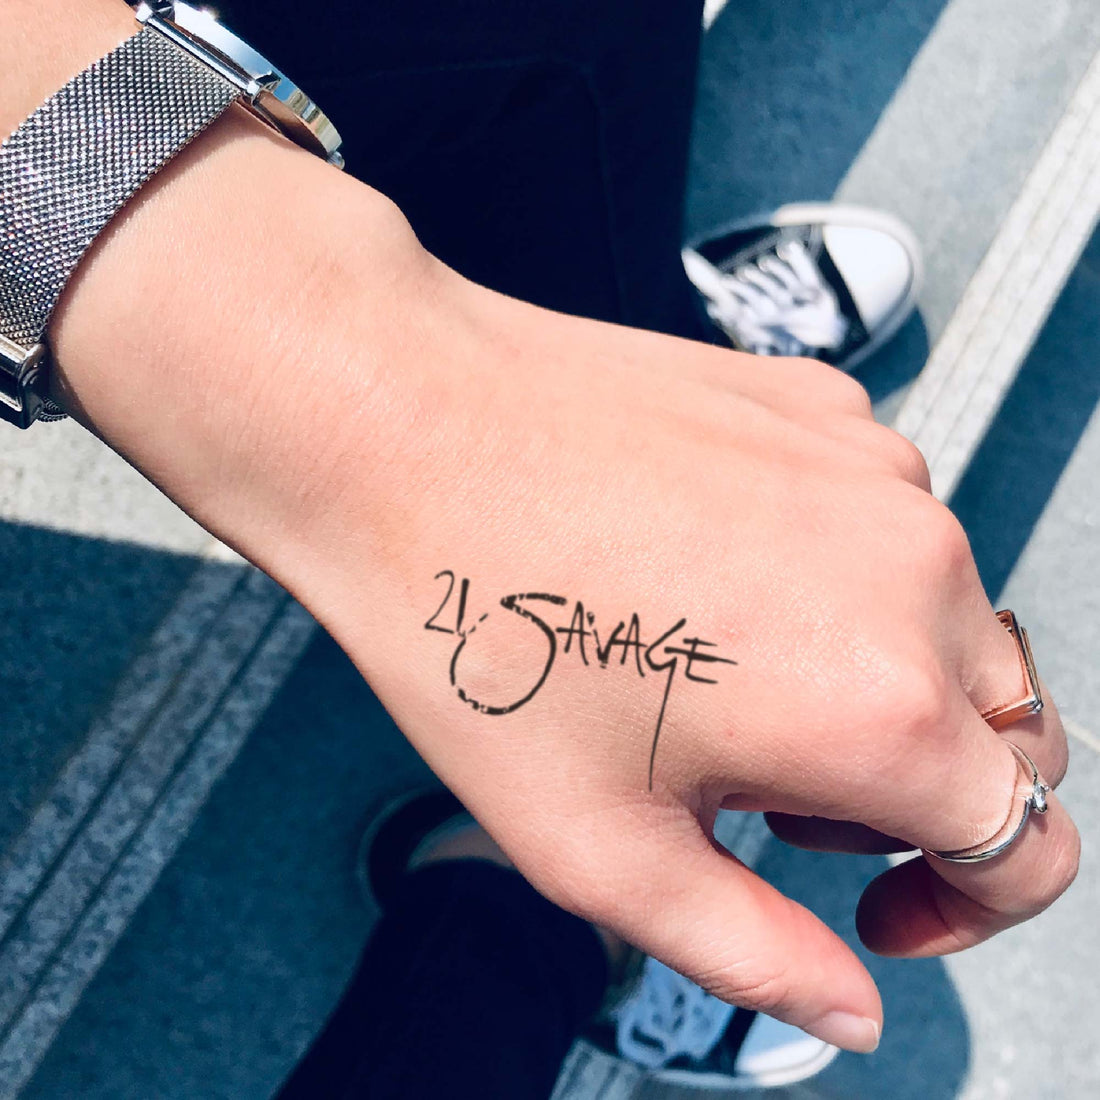 21 Savage custom temporary tattoo sticker design idea inspiration meanings removal arm wrist hand words font name signature calligraphy lyrics tour concert outfits merch accessory gift souvenir costumes wear dress up code